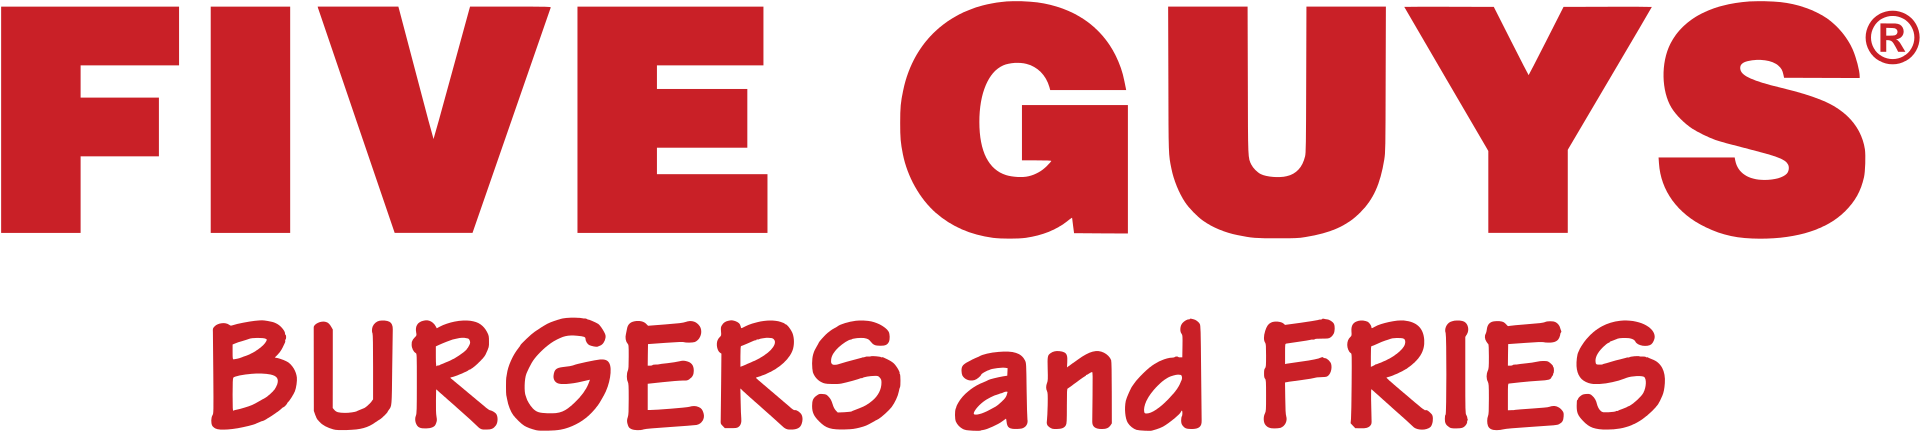 Open - Five Guys Burgers And Fries (2000x518), Png Download